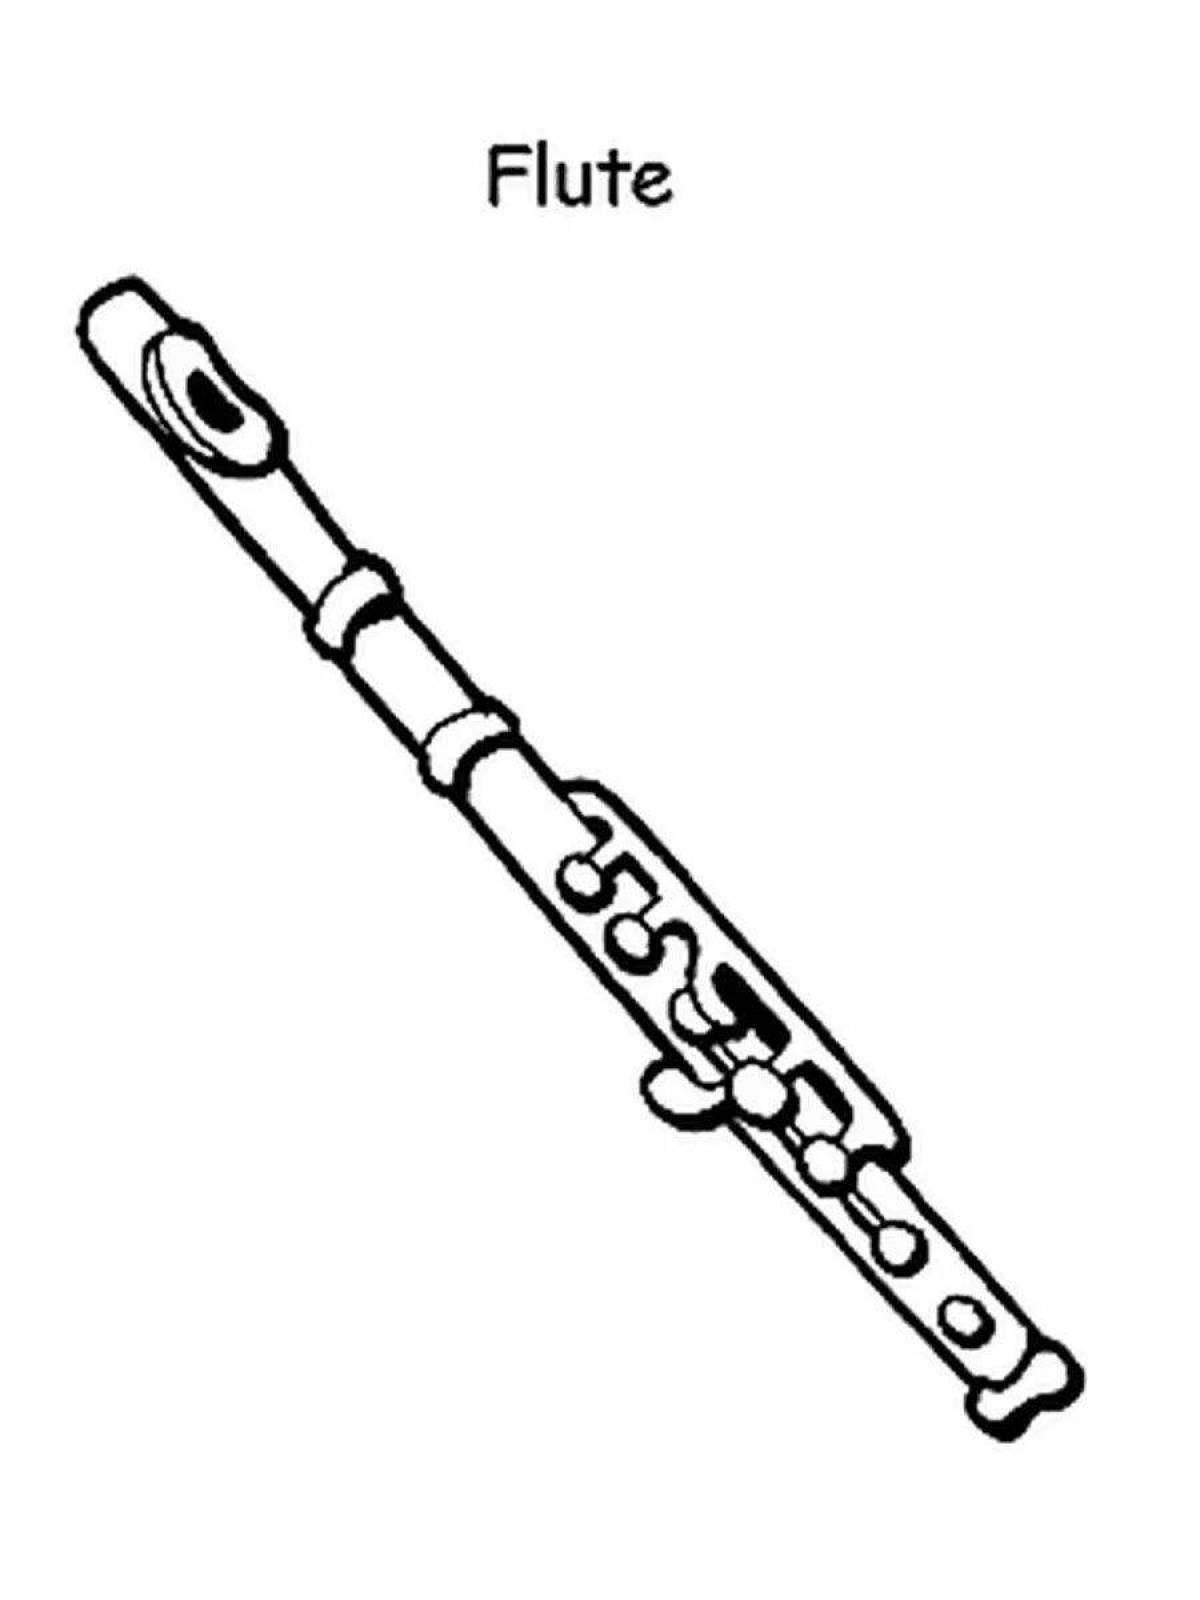 Amazing flute coloring book for kids